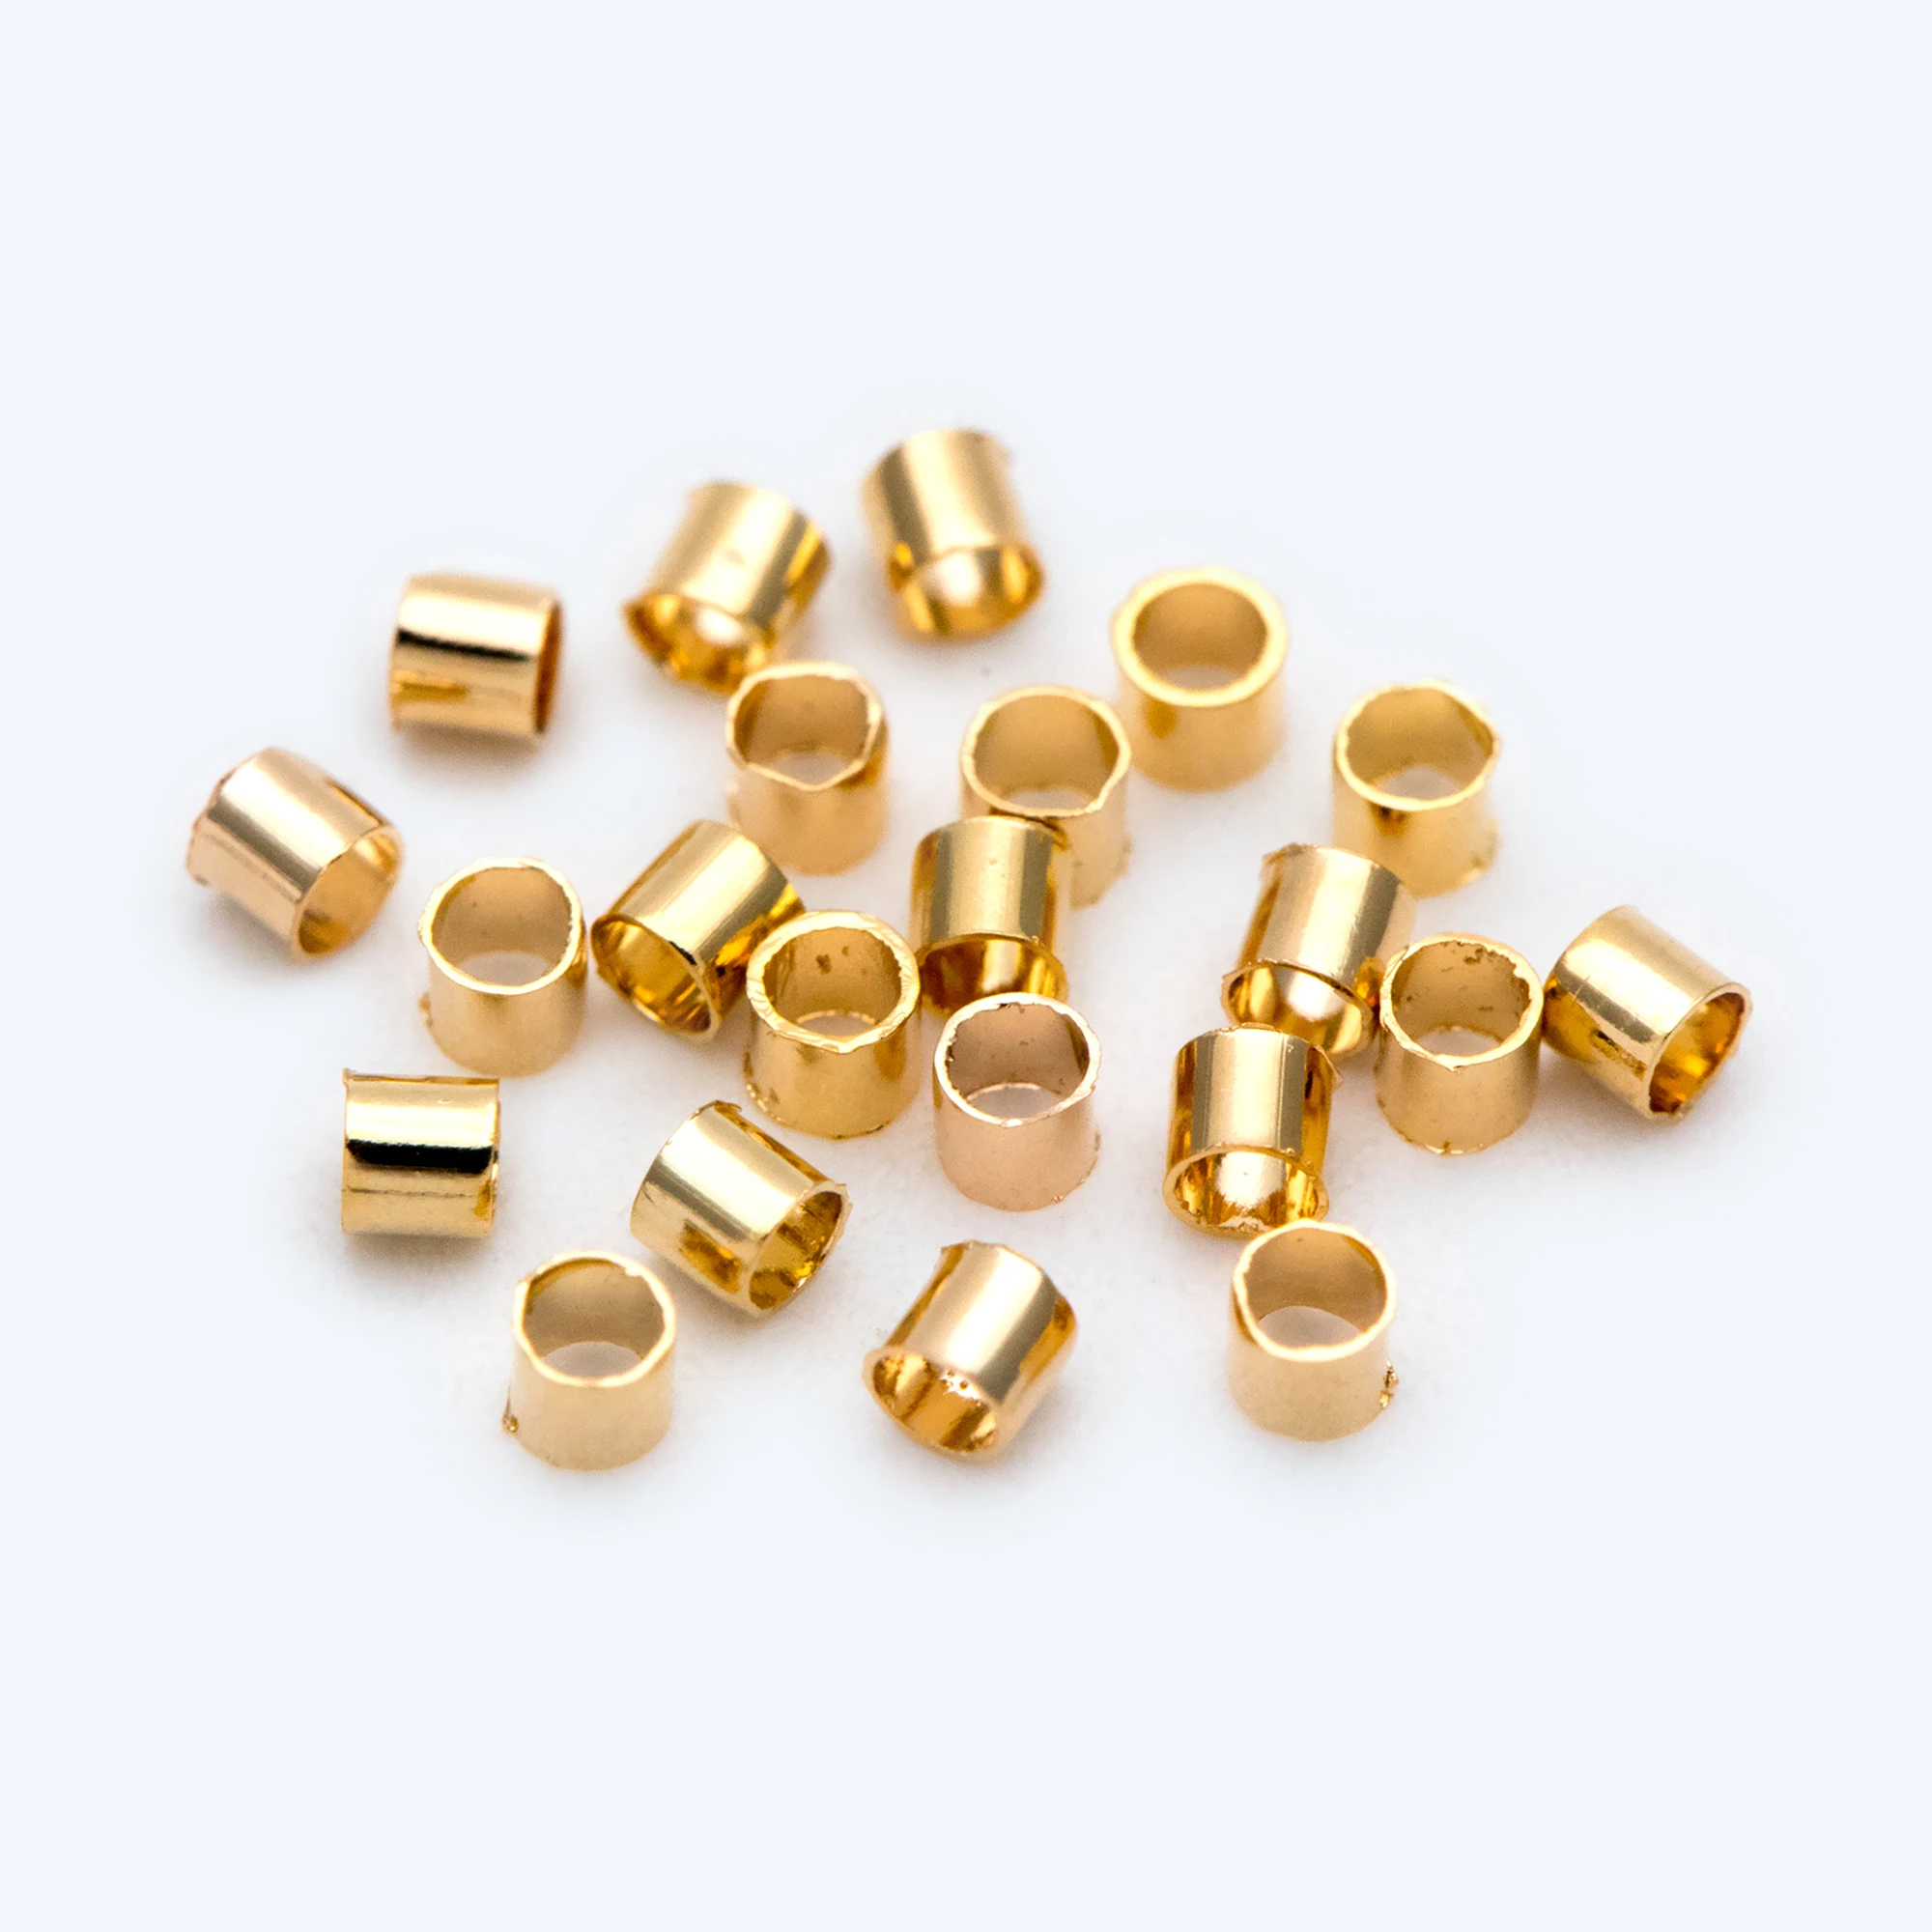 Gold Plated Brass Jewelry Making Supplies